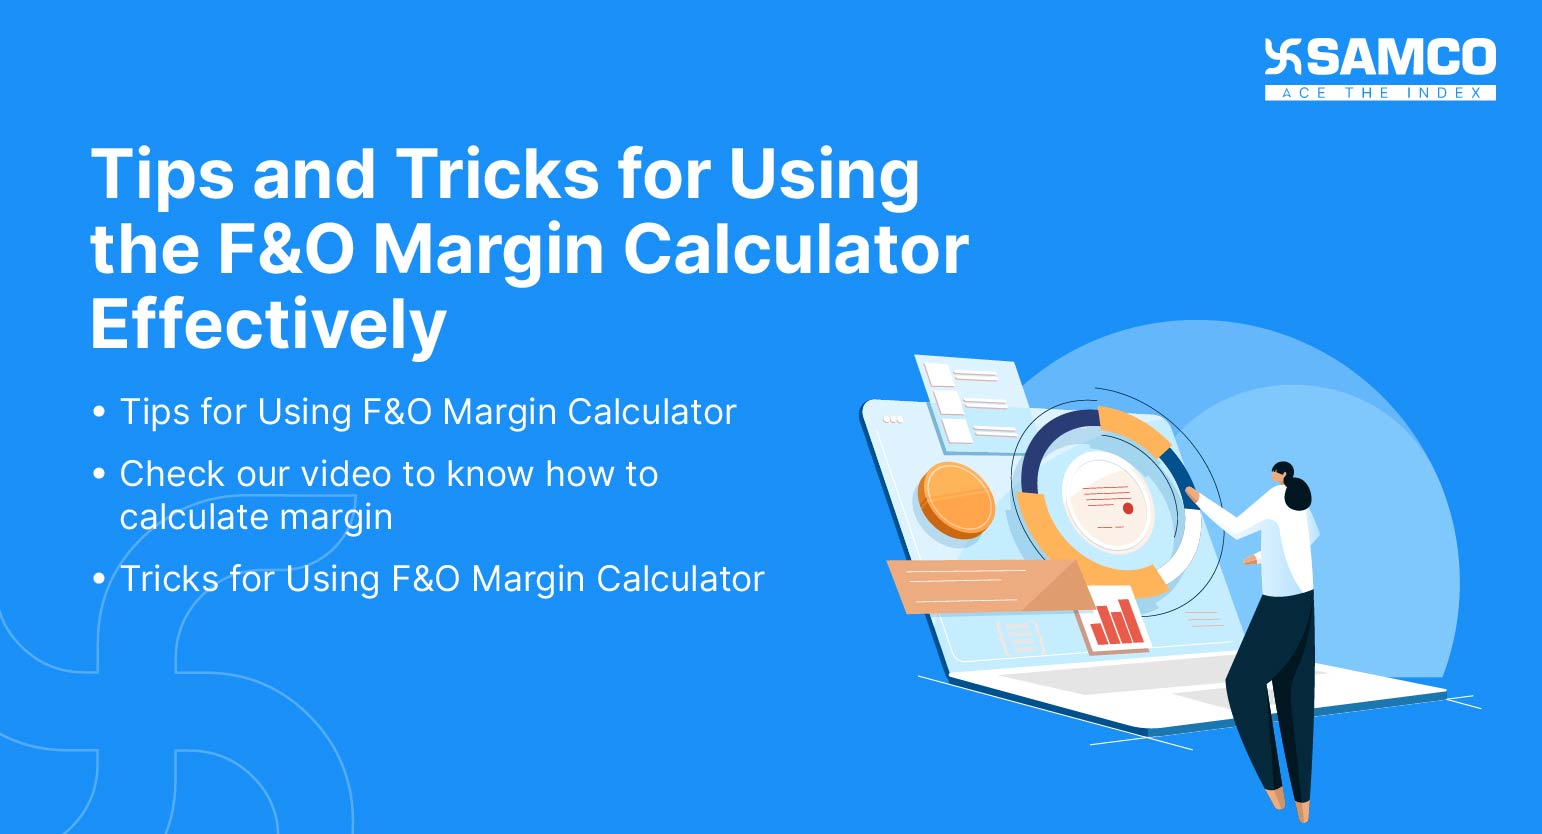 Tips and Tricks for Using the F&O Margin Calculator Effectively